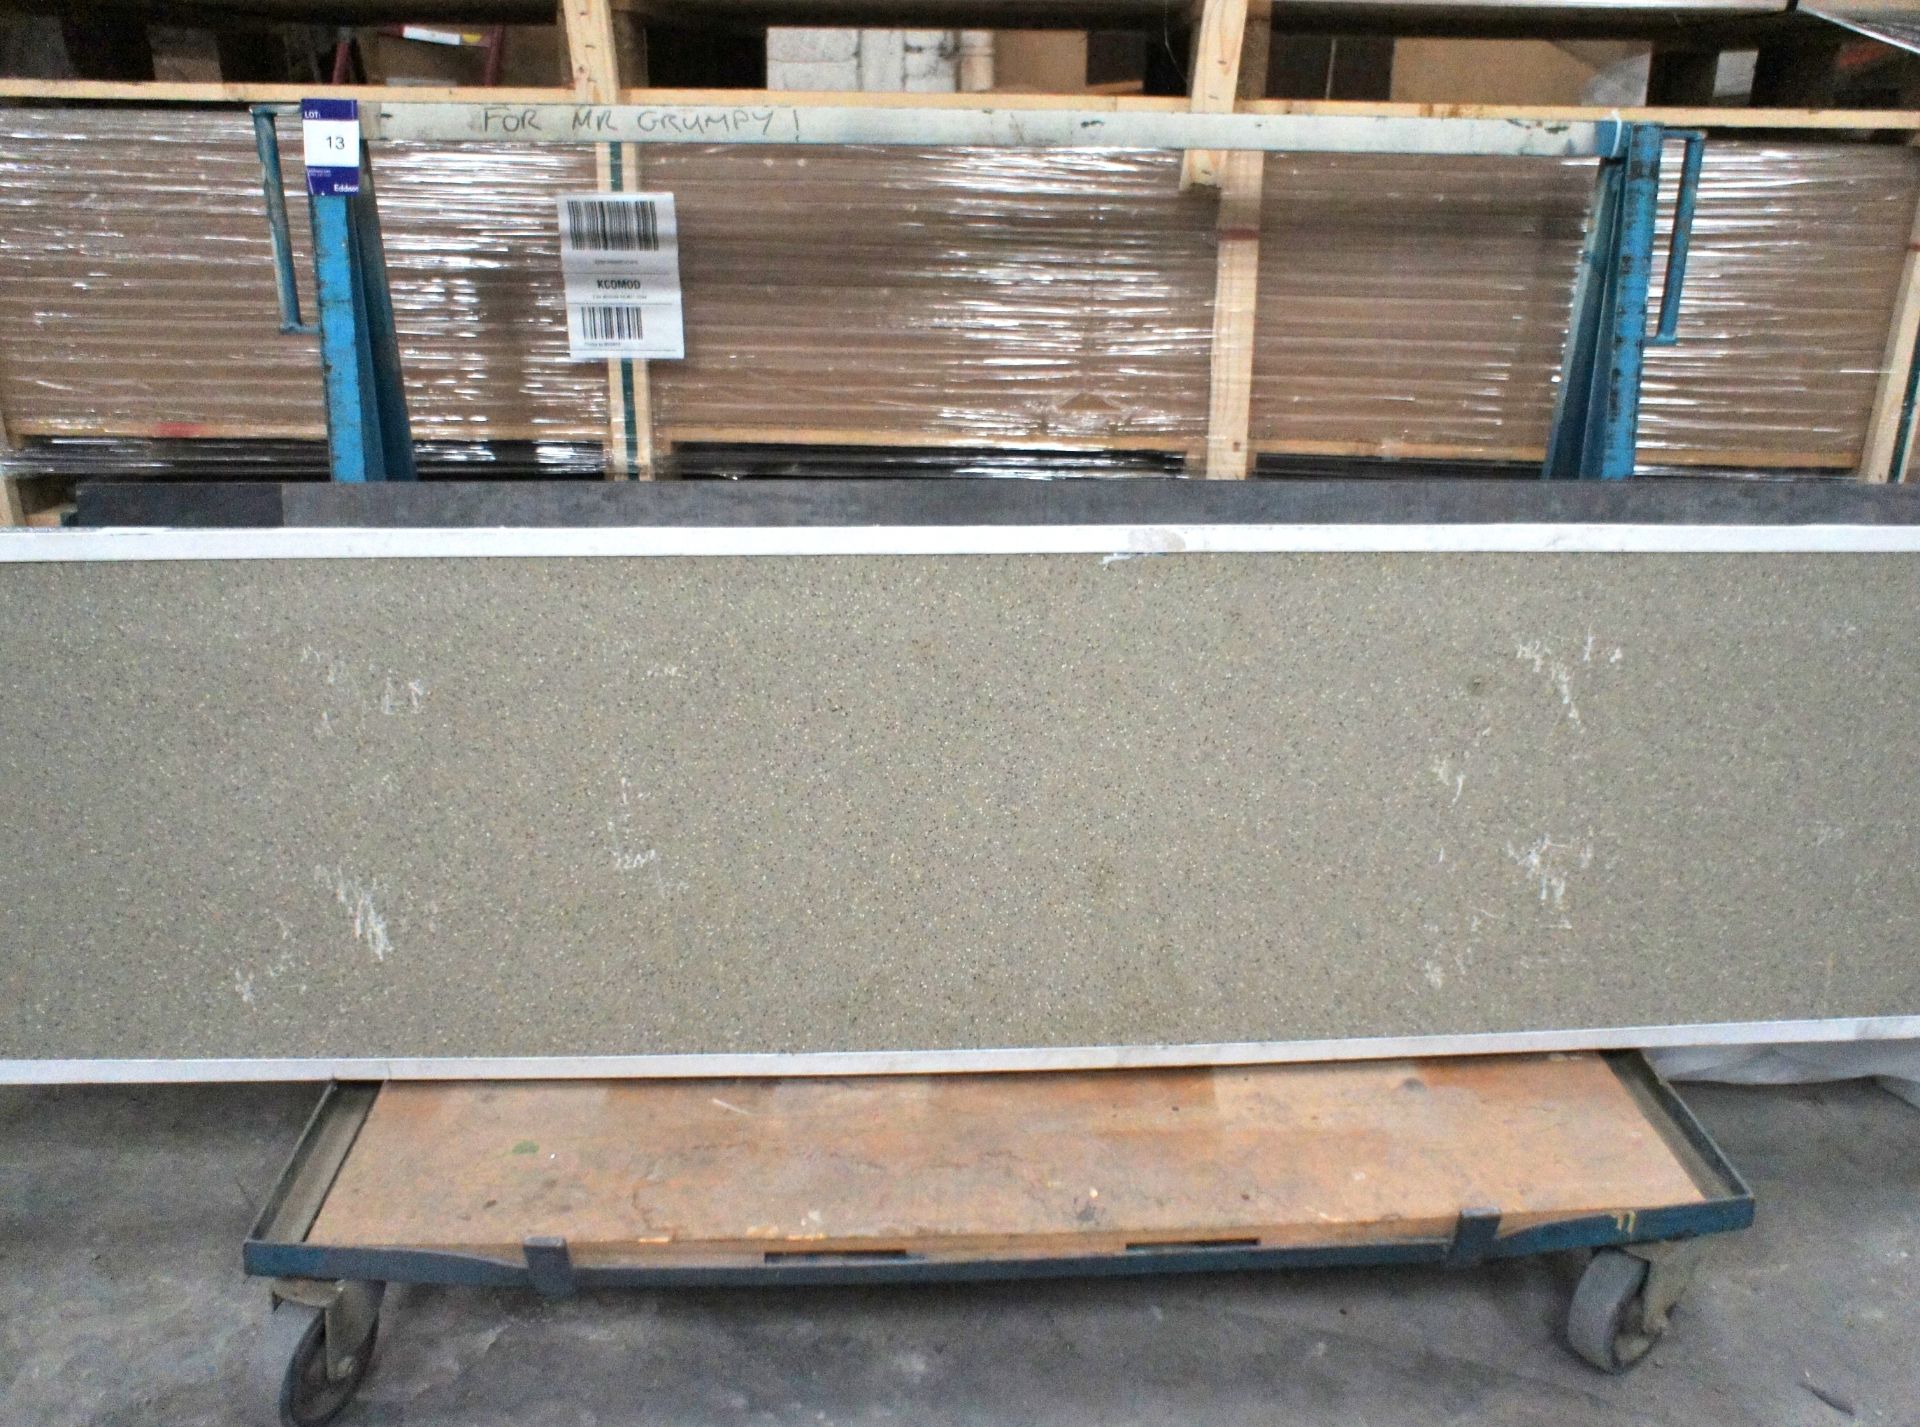 Steel Fabricated Stock Cart - Image 2 of 3